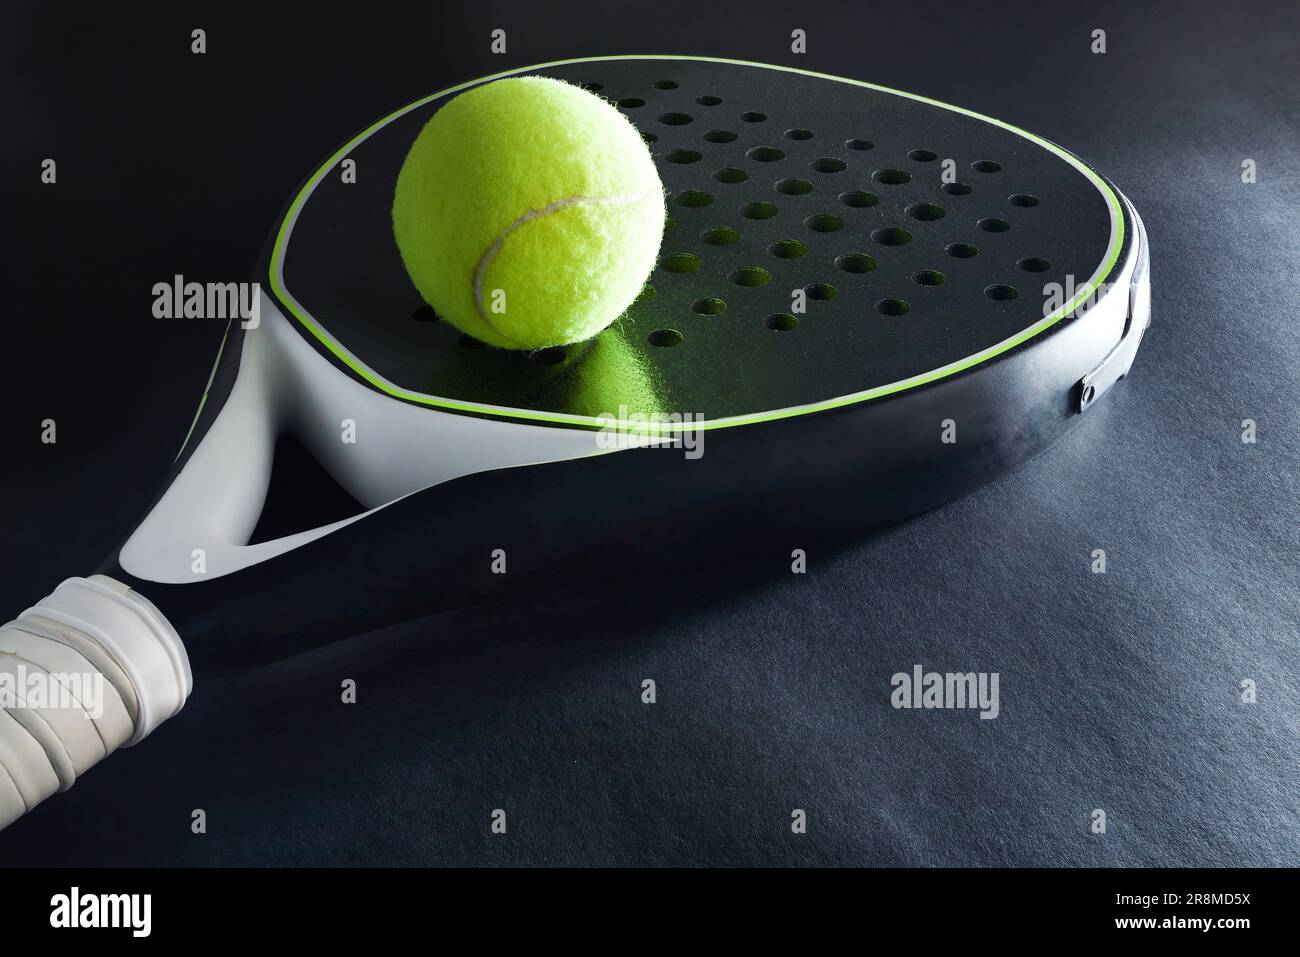 Background of black and white paddle racket and ball on top on black background. Elevated view. Stock Photo